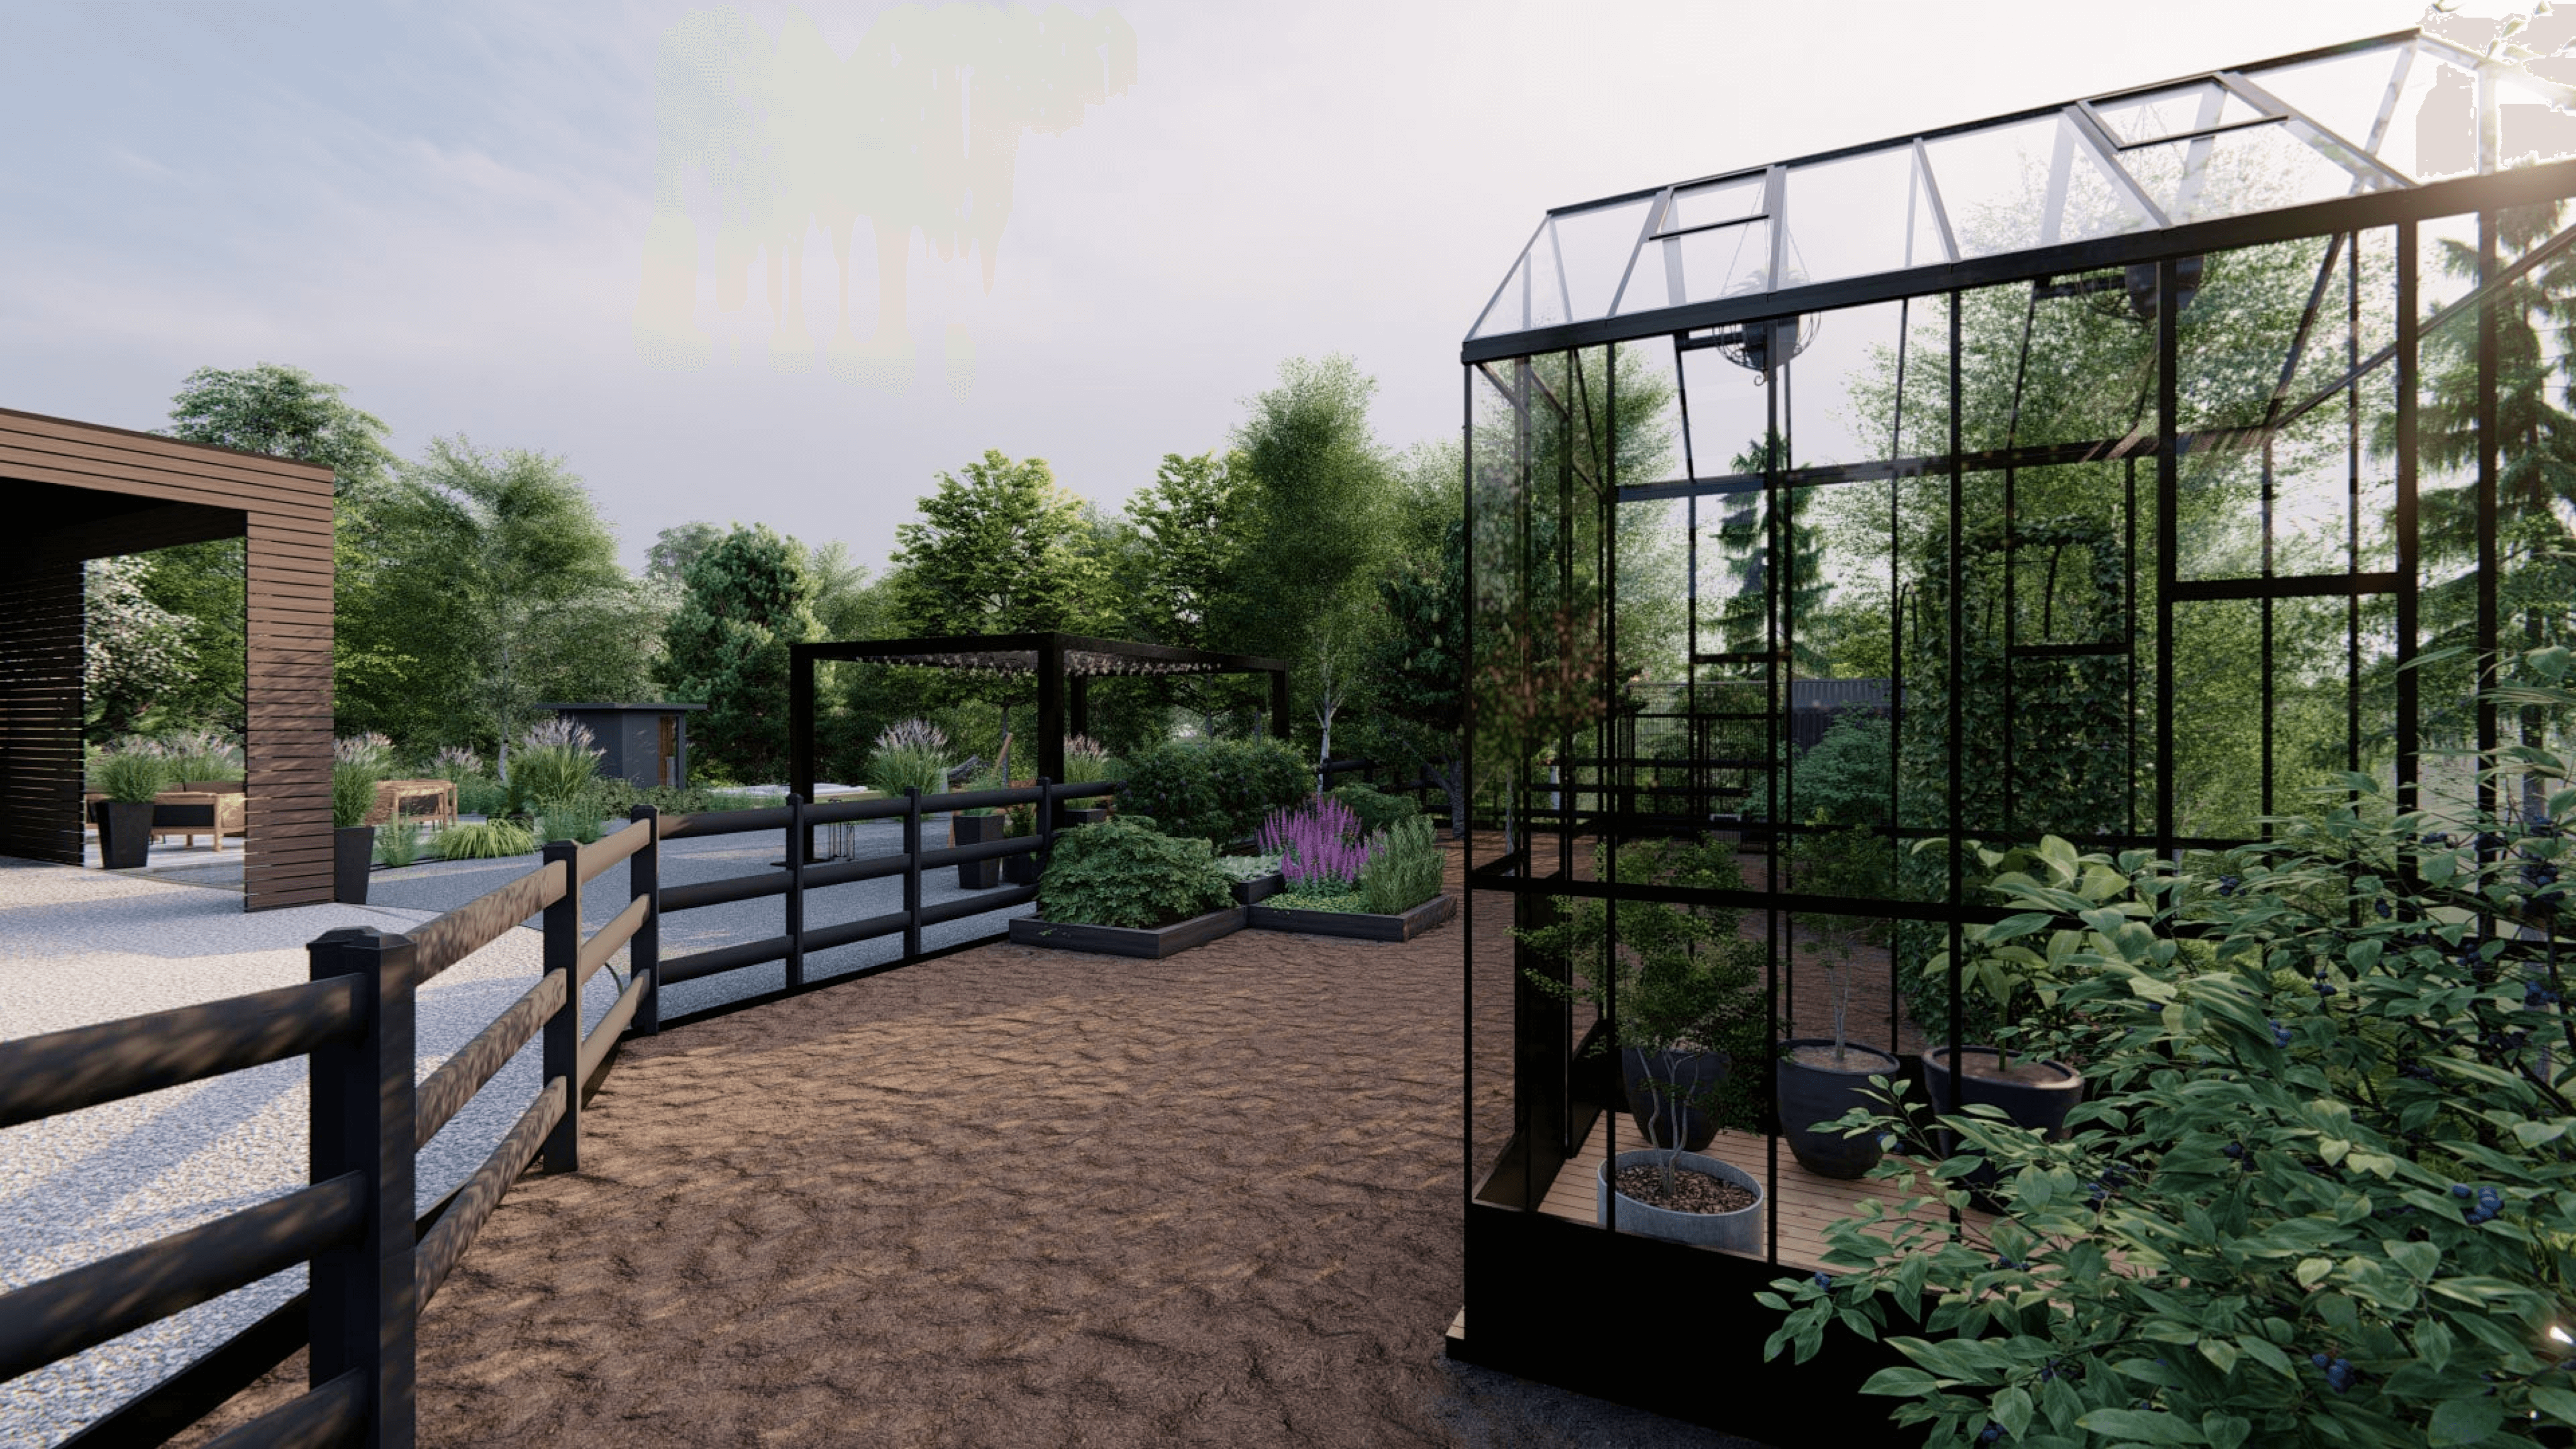 a yard design that includes a fenced in garden area and a large black and glass greenhouse